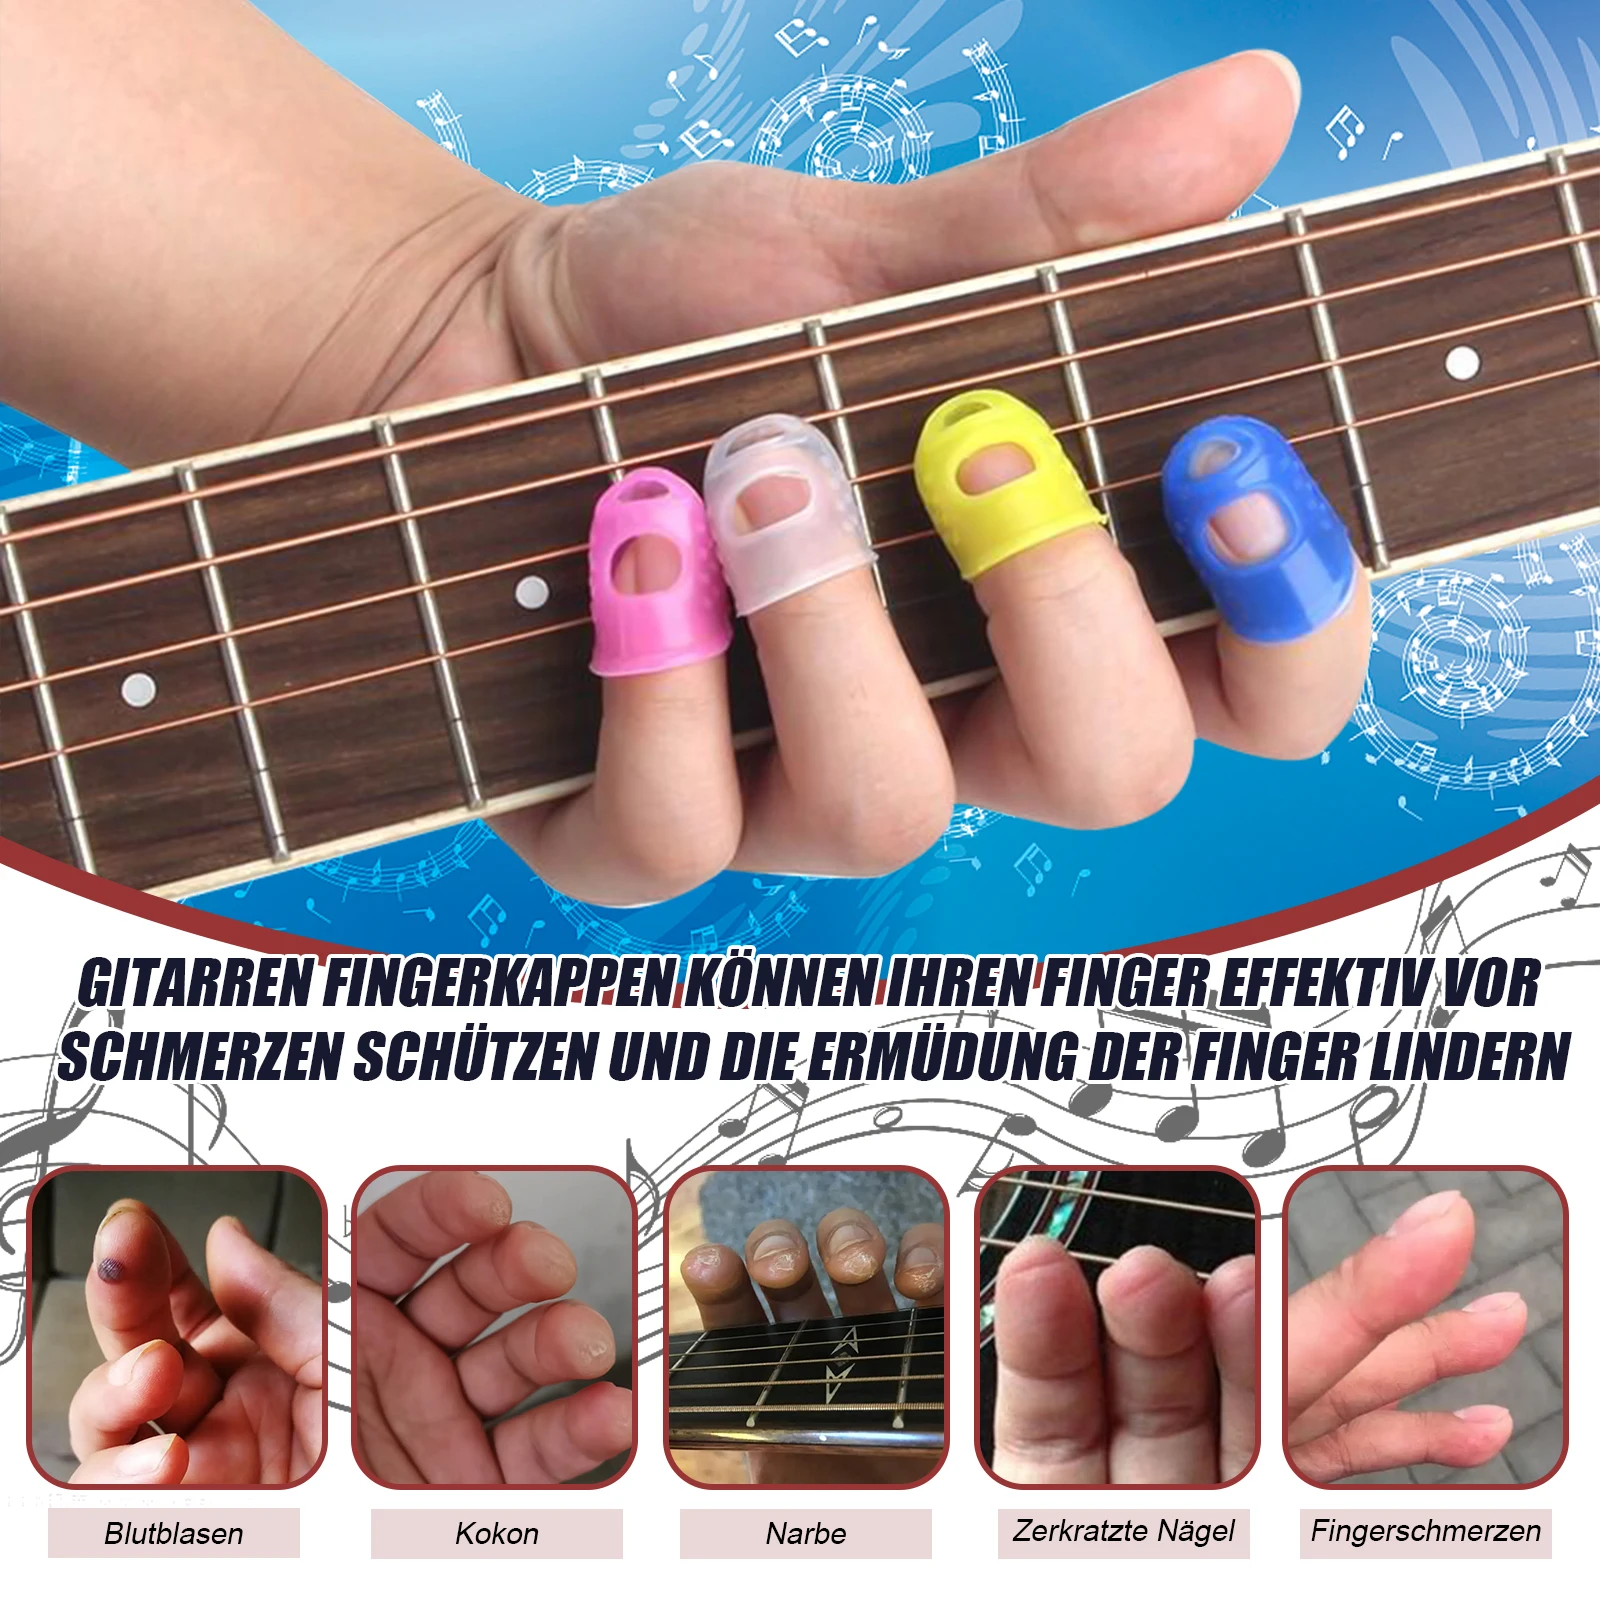 30 Pcs Silicone Guitar Fingertip Protection Press Accessories Fingerstall